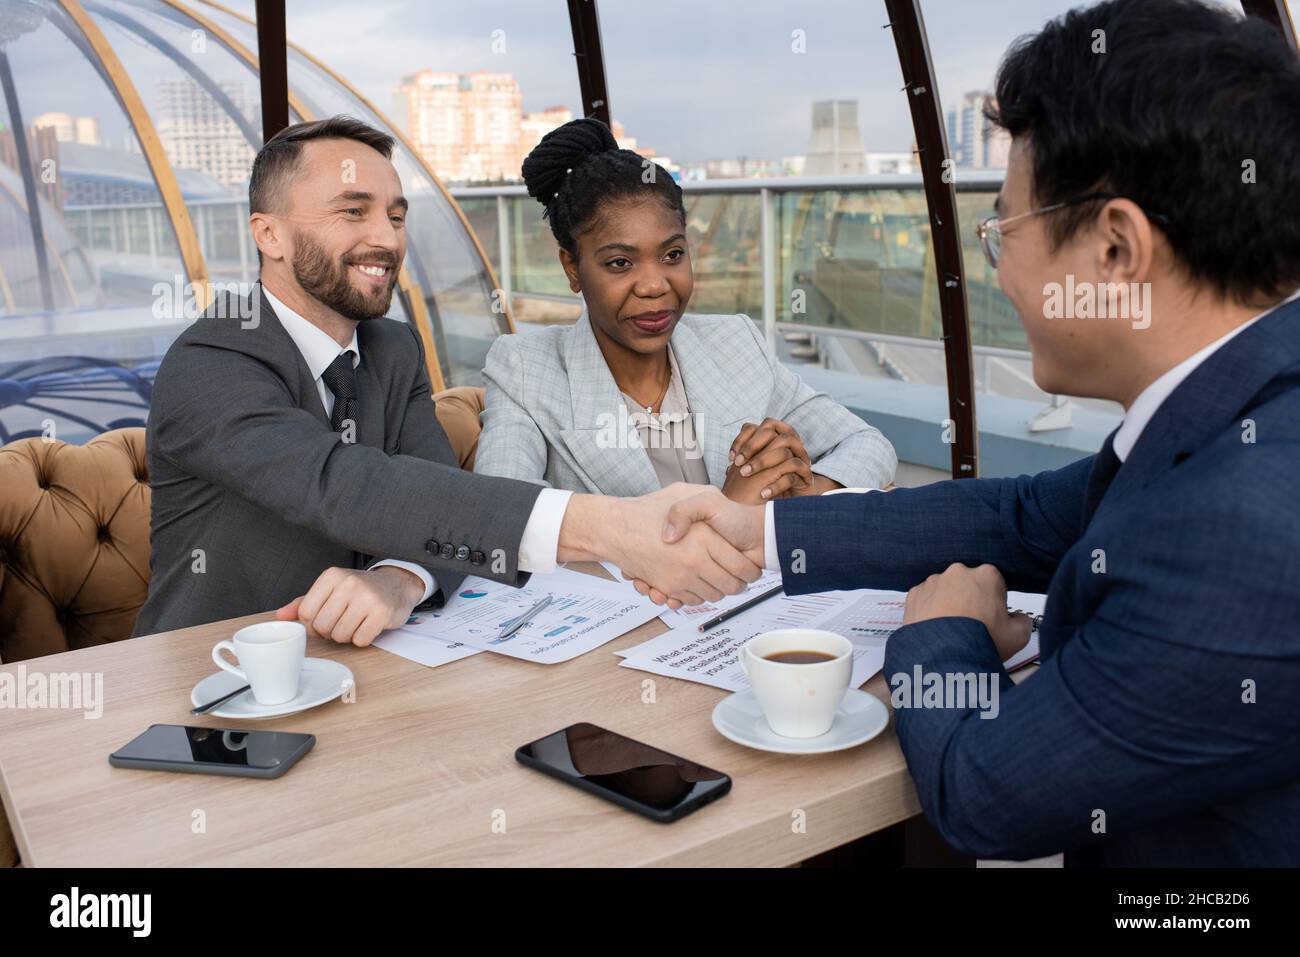 Two intercultural successful businessmen shaking hands over papers on table after negotiation about signing new contract Stock Photo